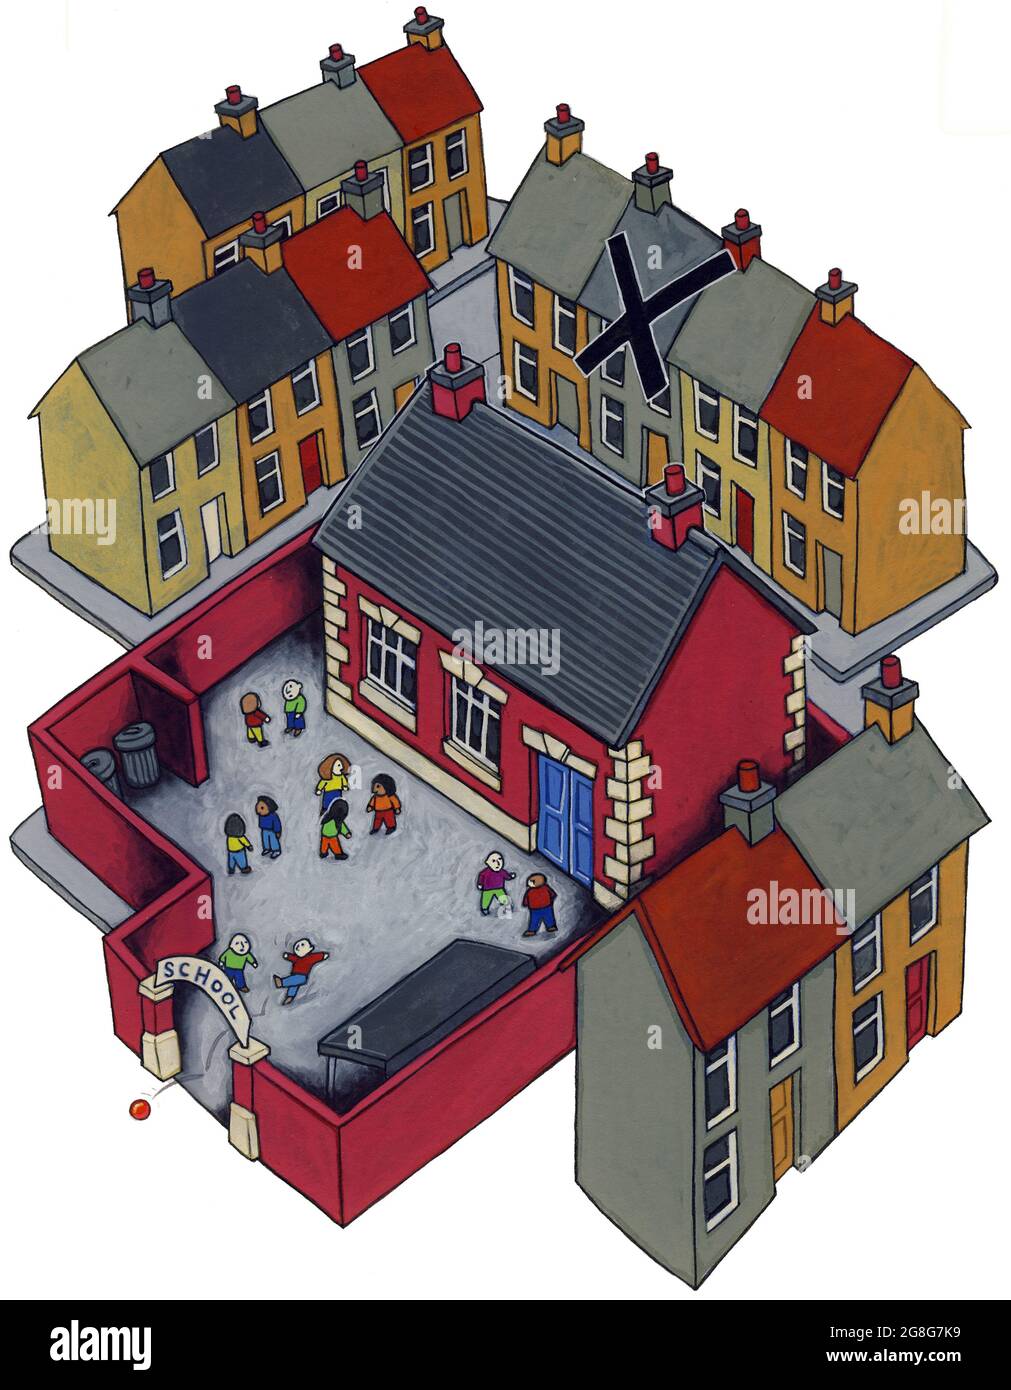 Concept art illustration showing a school surrounded by houses. One house is marked with a cross, representing excluded children or problem families. Stock Photo